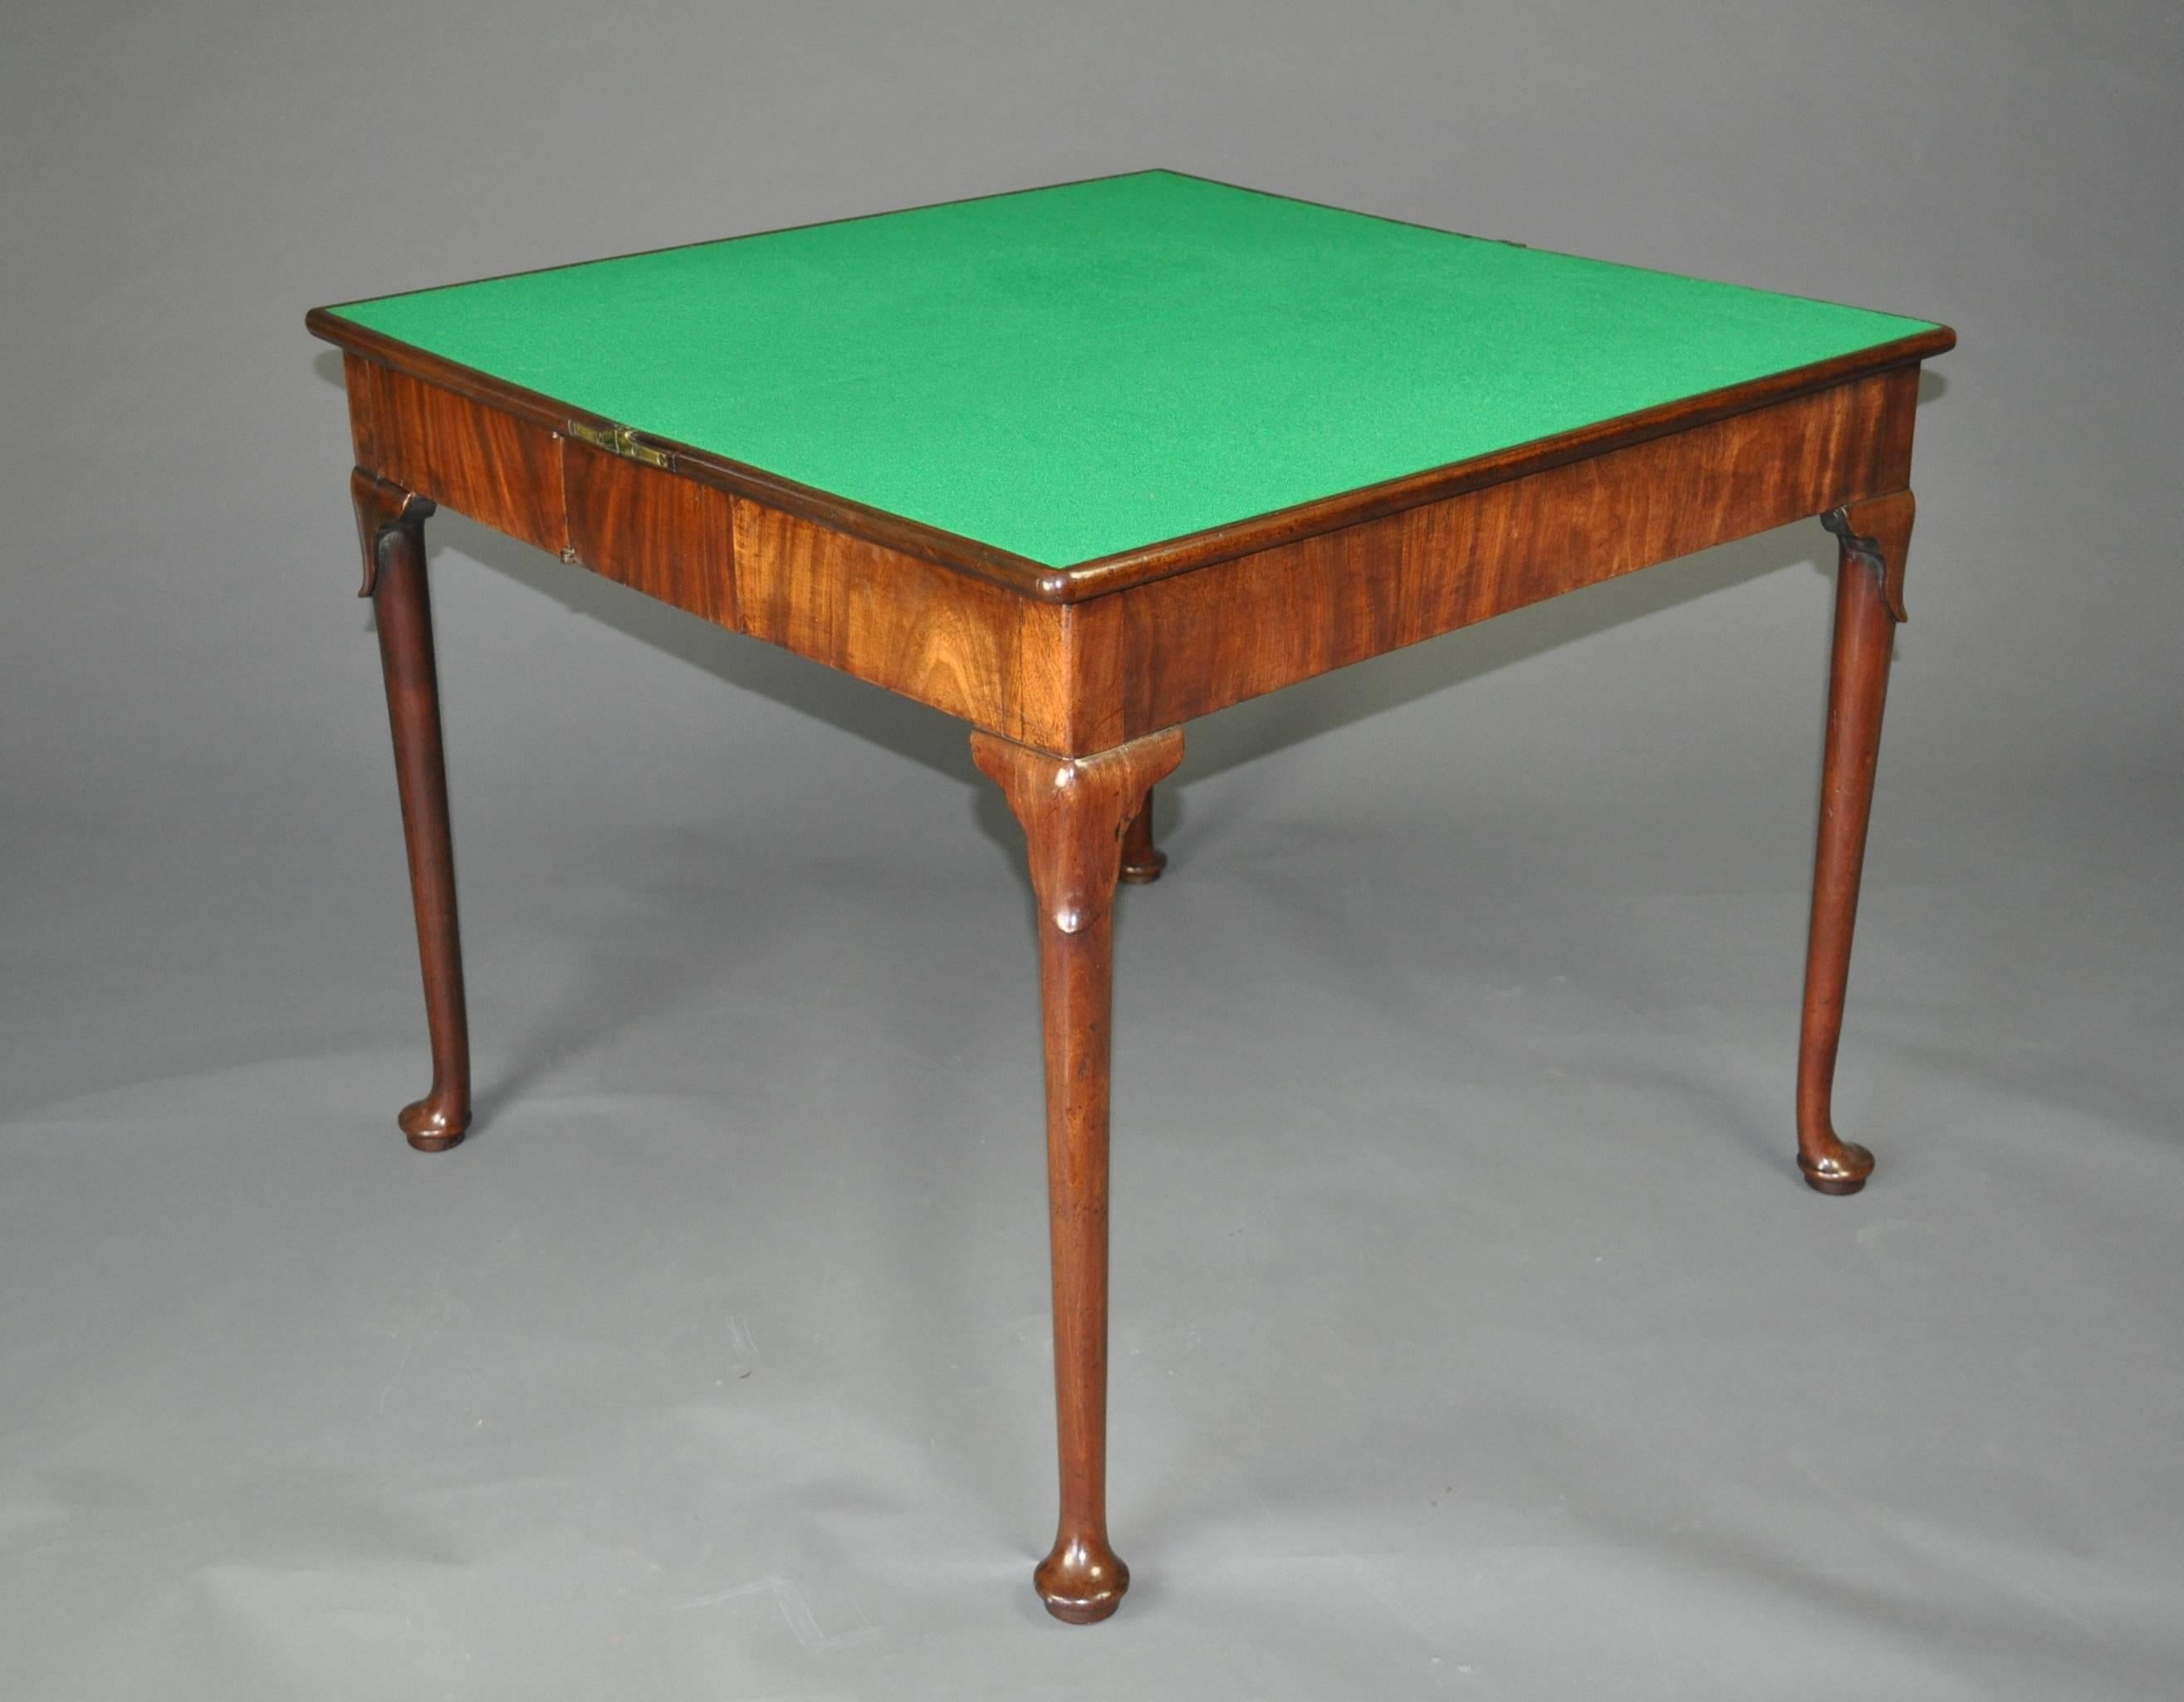 Matched Pair of Mid-18th Century Mahogany Card Tables In Good Condition For Sale In Folkestone, Kent